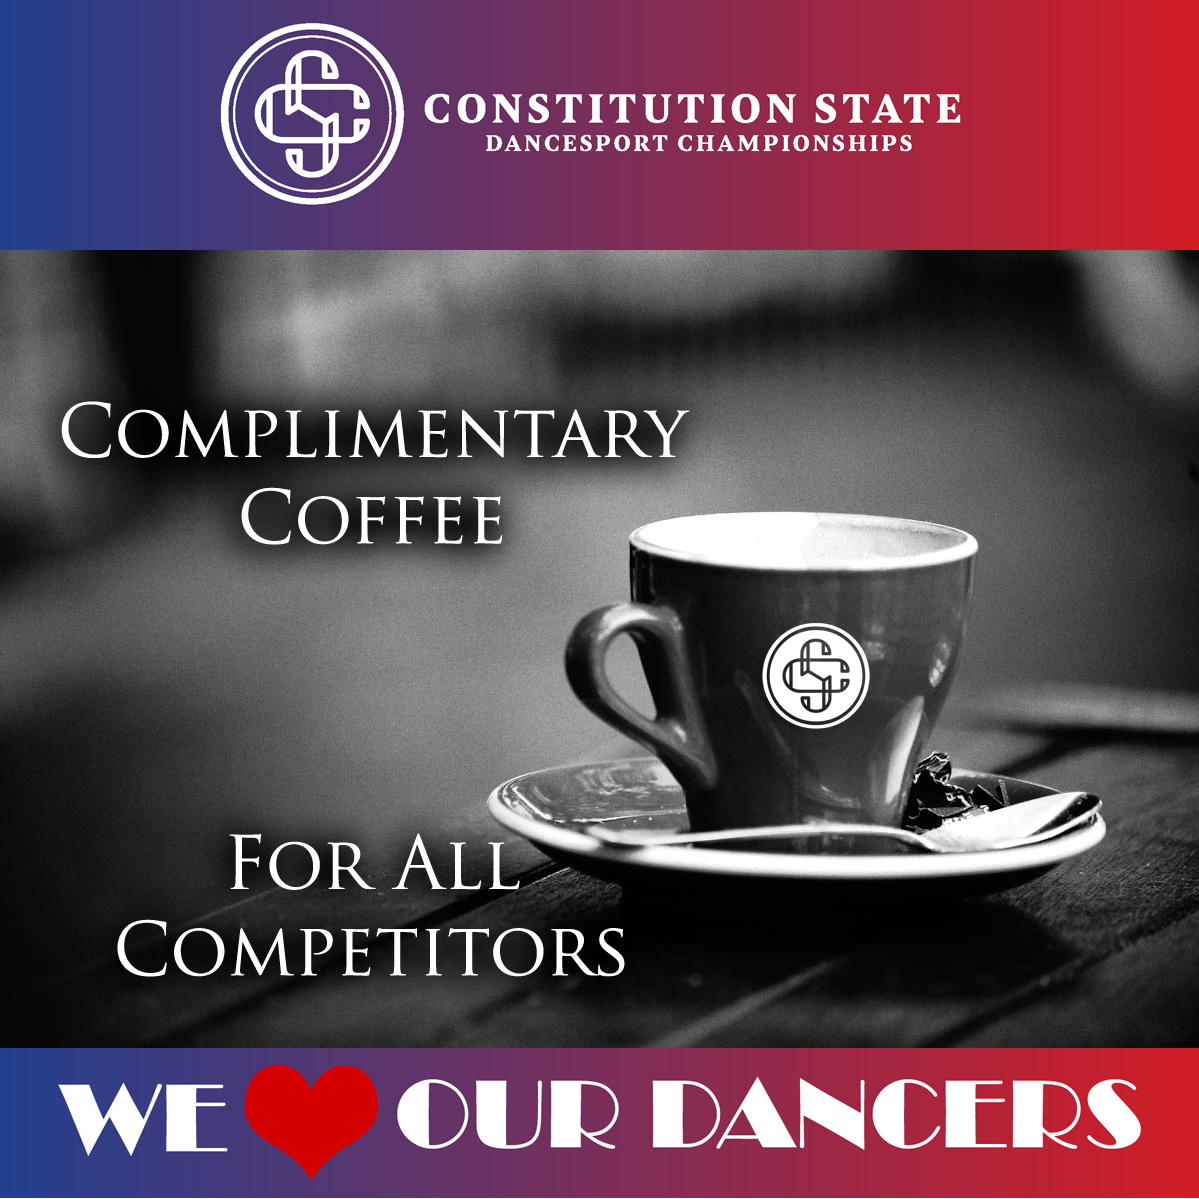 Complimentary Coffee Constitution State Dancesport Championships